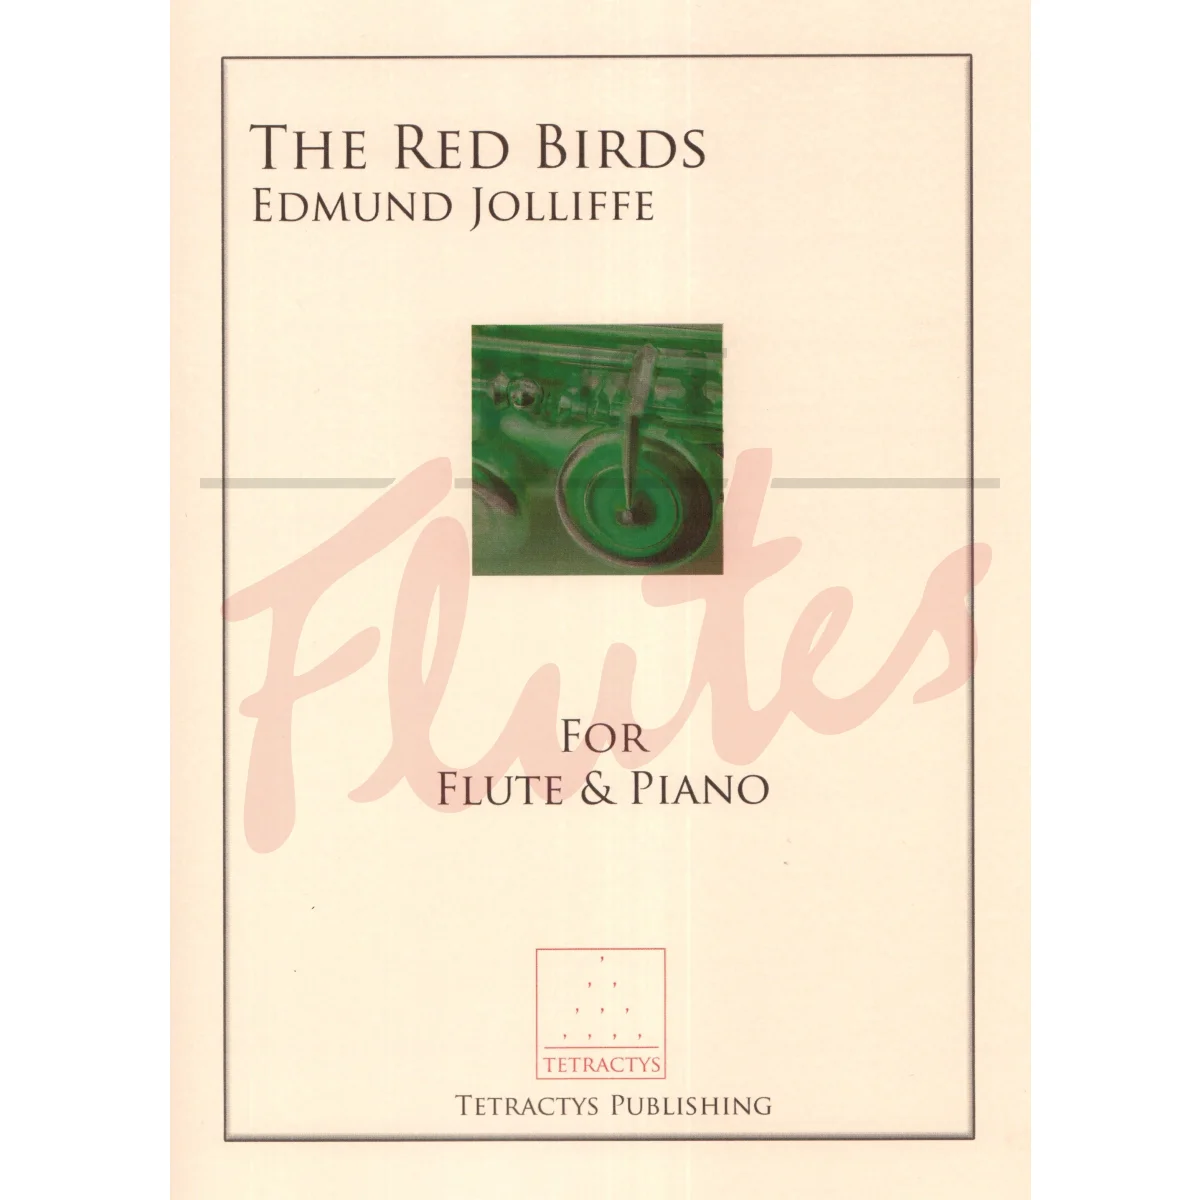 The Red Birds for Flute and Piano